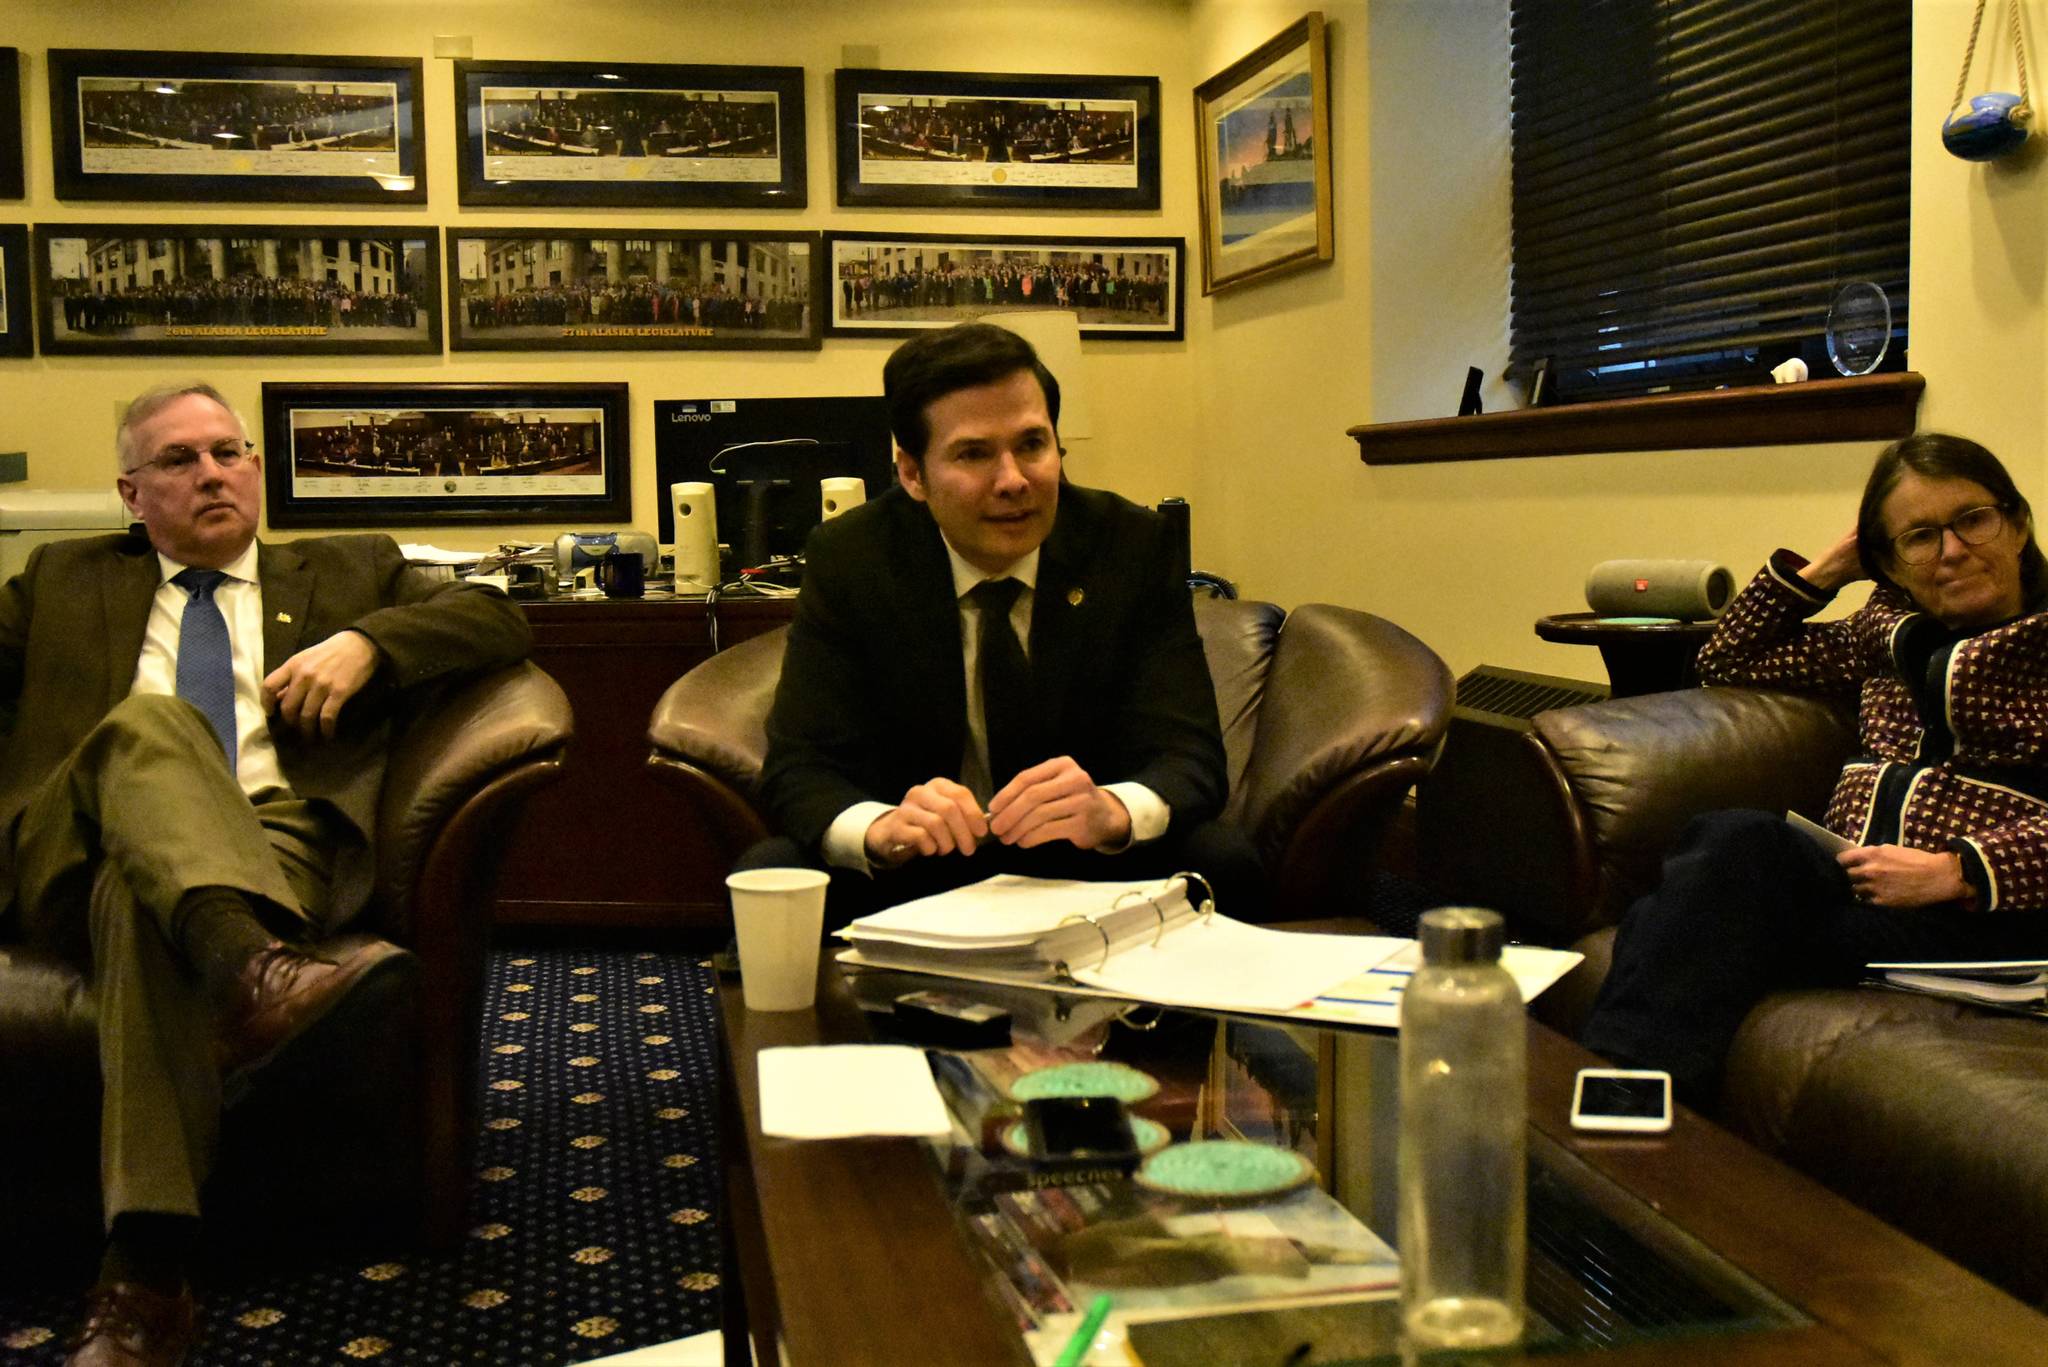 House Speaker Bryce Edgmon, I-Dillingham; and House Finance Committee Co-Chairs Rep. Neal Foster, D-Nome; and Rep. Jennifer Johnston, R-Anchorage; meet with reporters following a vote of the budget on Tuesday, Mar. 3, 2020. (Peter Segall | Juneau Empire)